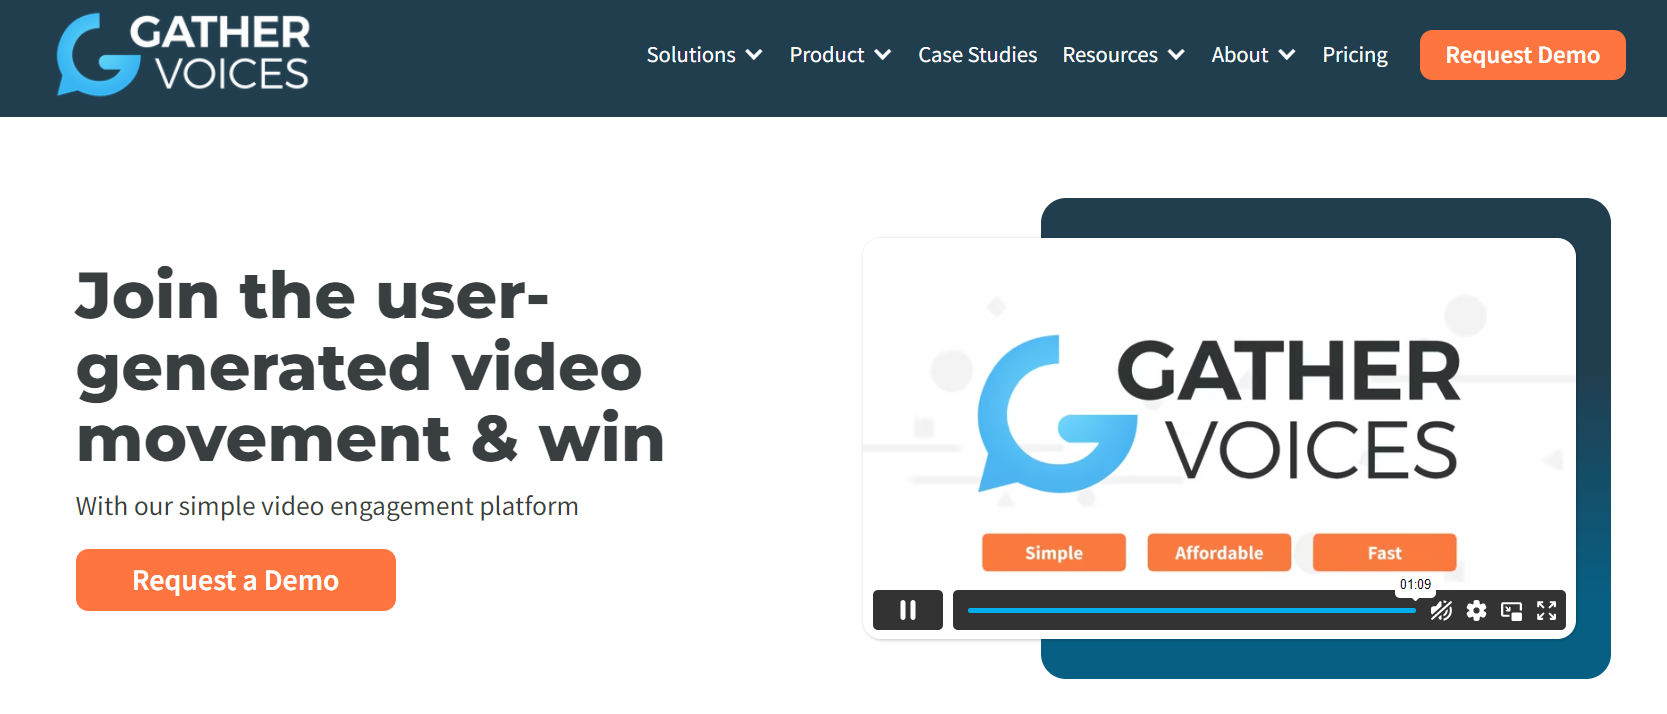 Gather Voices homepage: Join the user-generated video movement & win